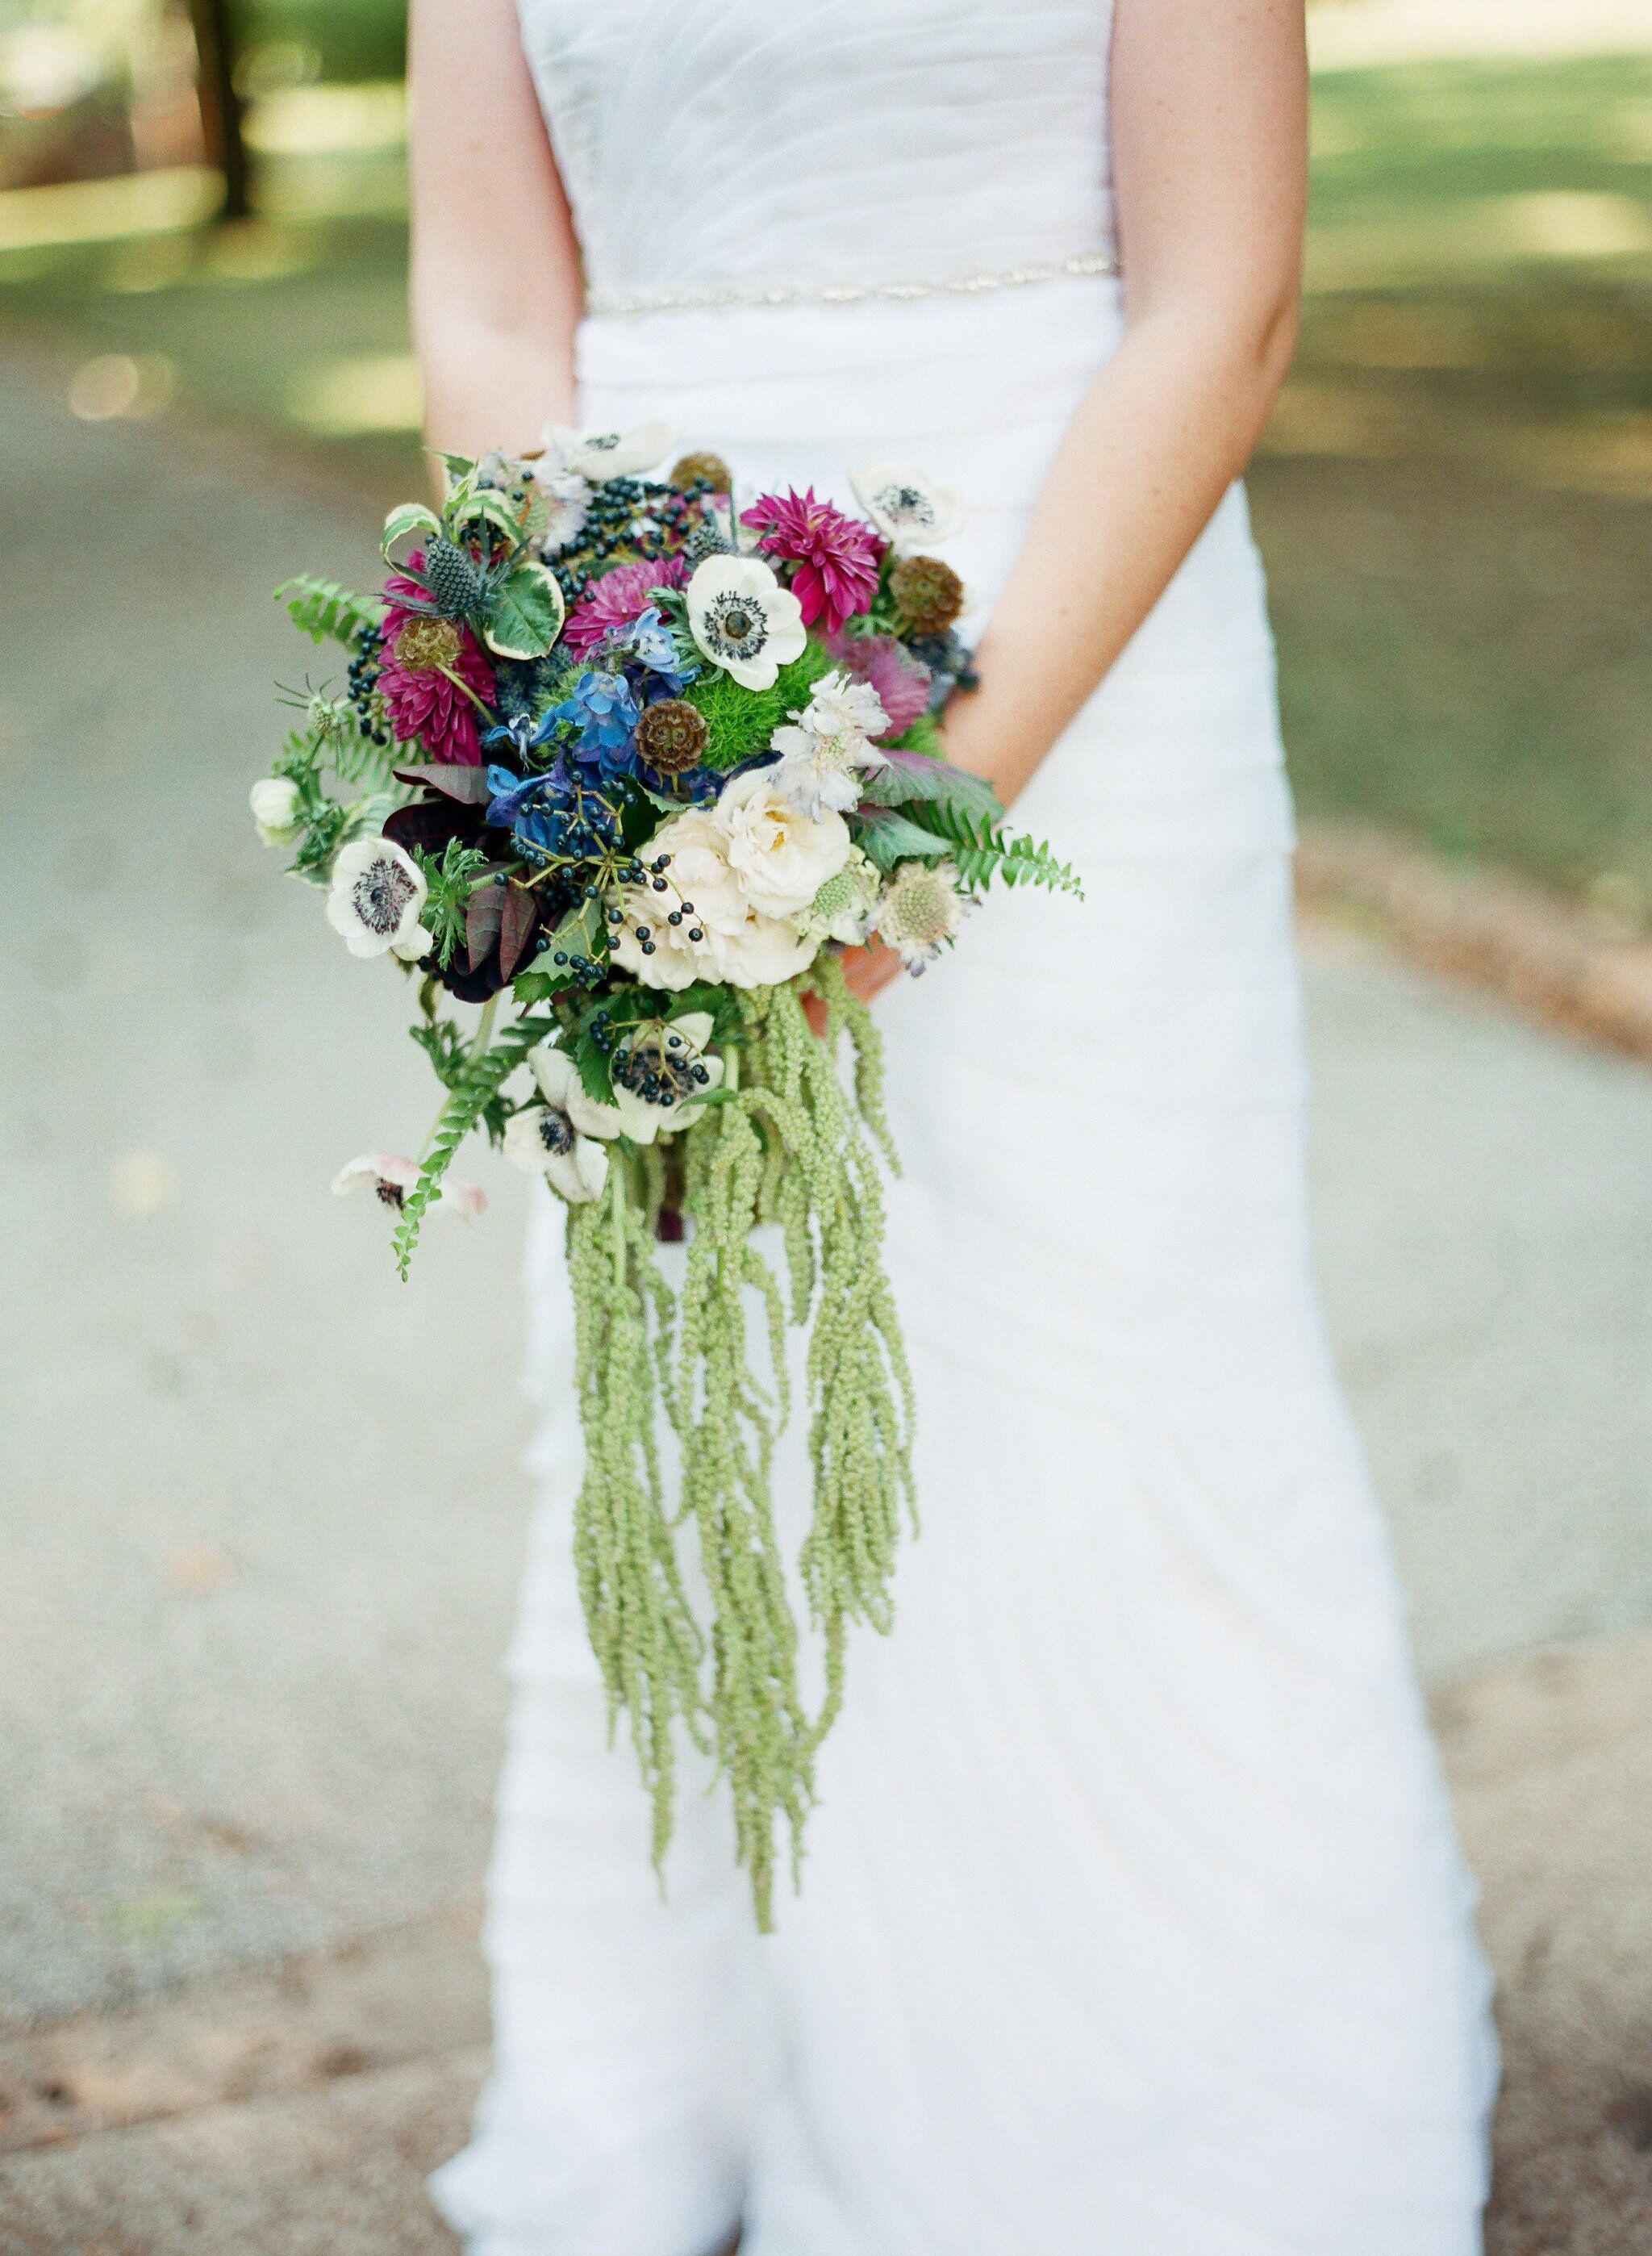 How To Make A Waterfall Wedding Bouquet